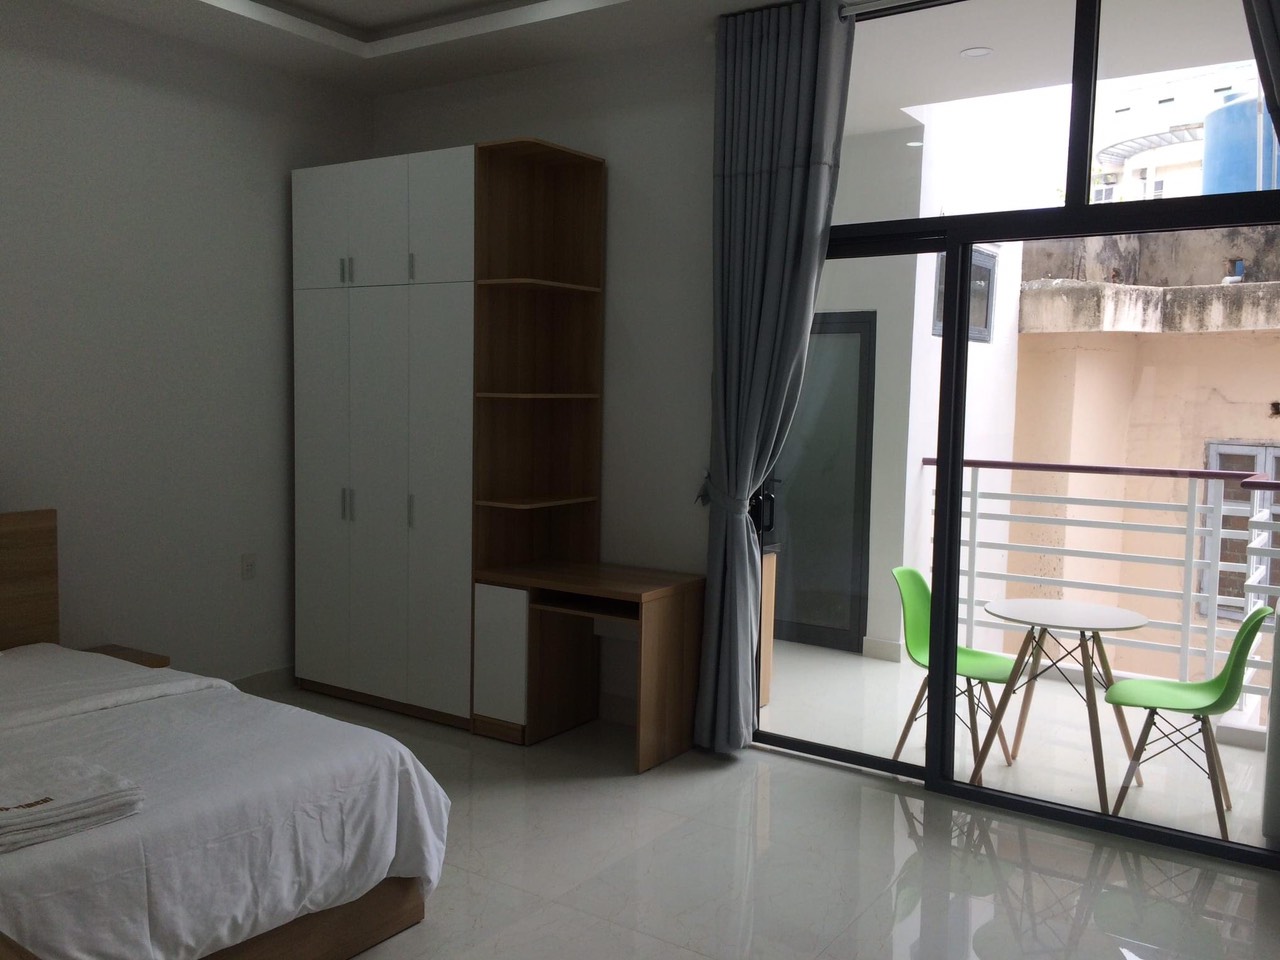 Apartment building for rent in the center of Nha Trang city.